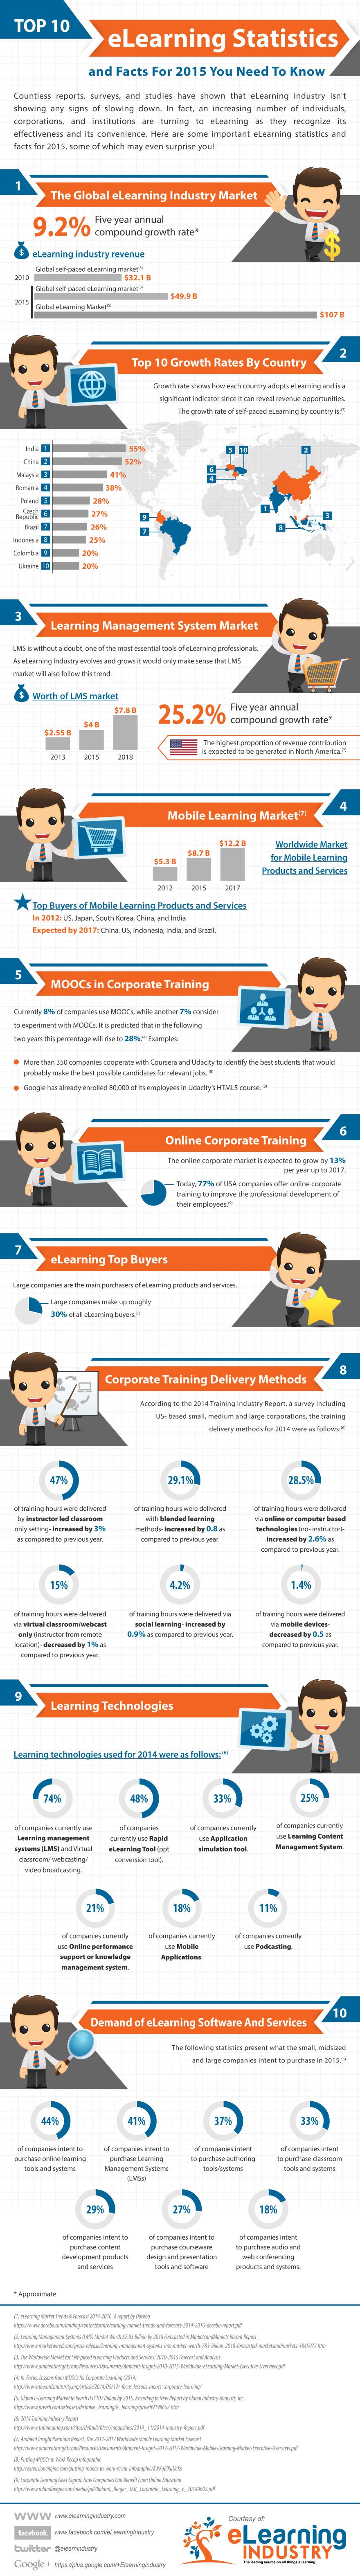 The Top eLearning Stats and Facts For 2015 Infographic